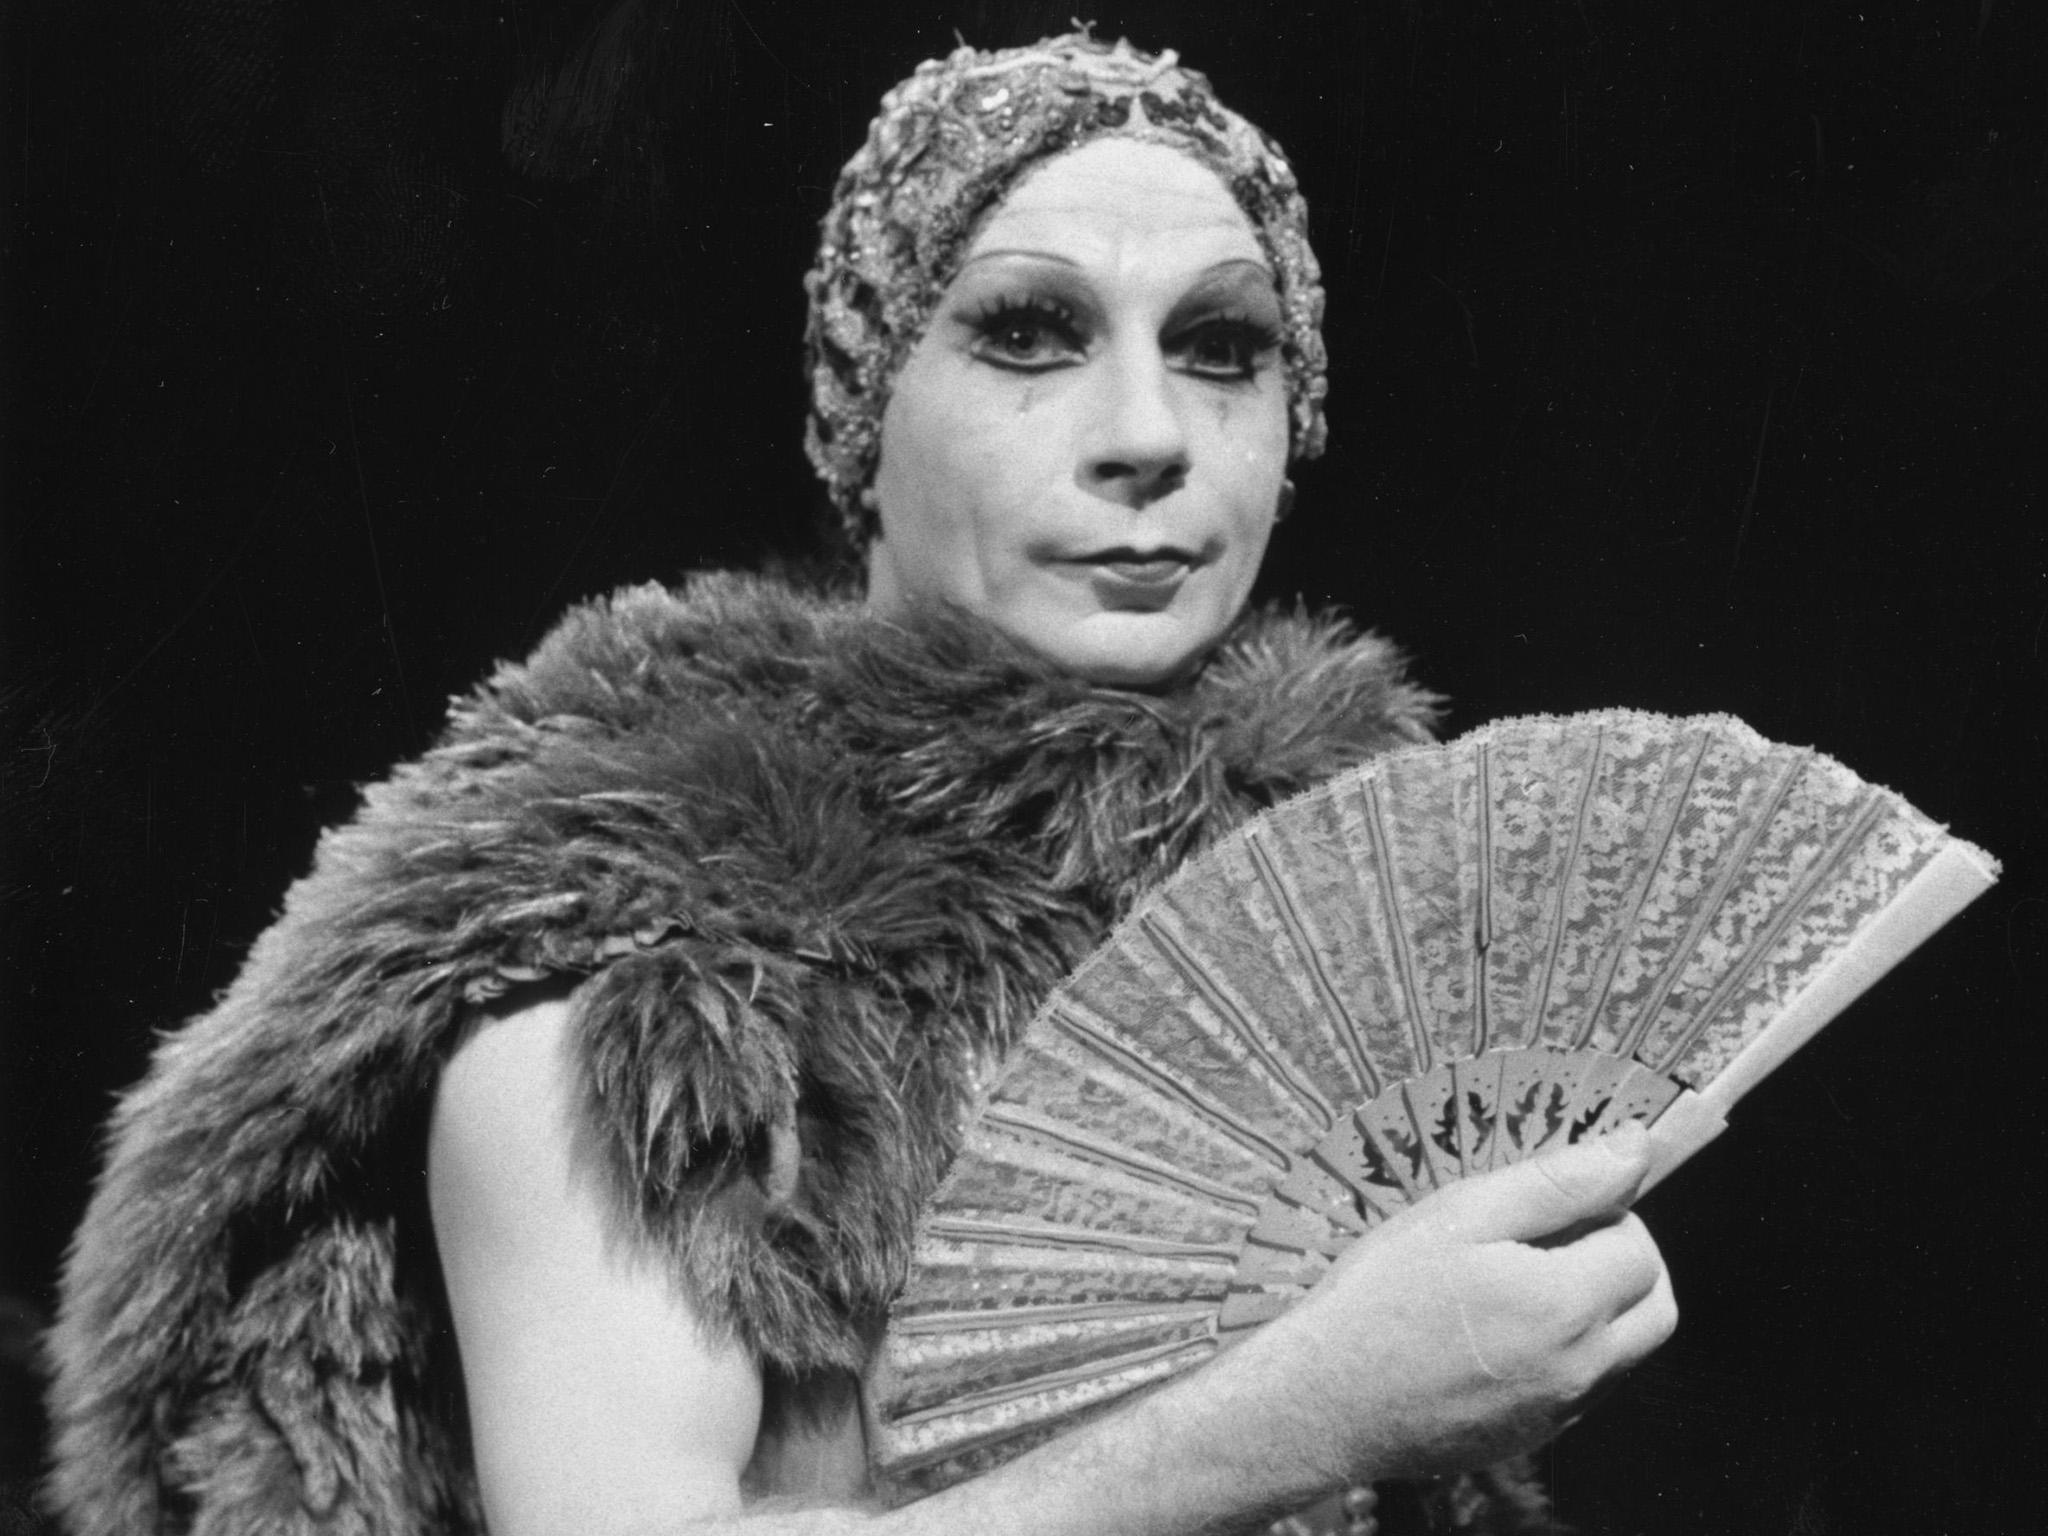 Kemp onstage in his play ‘The Flowers’ in 1975